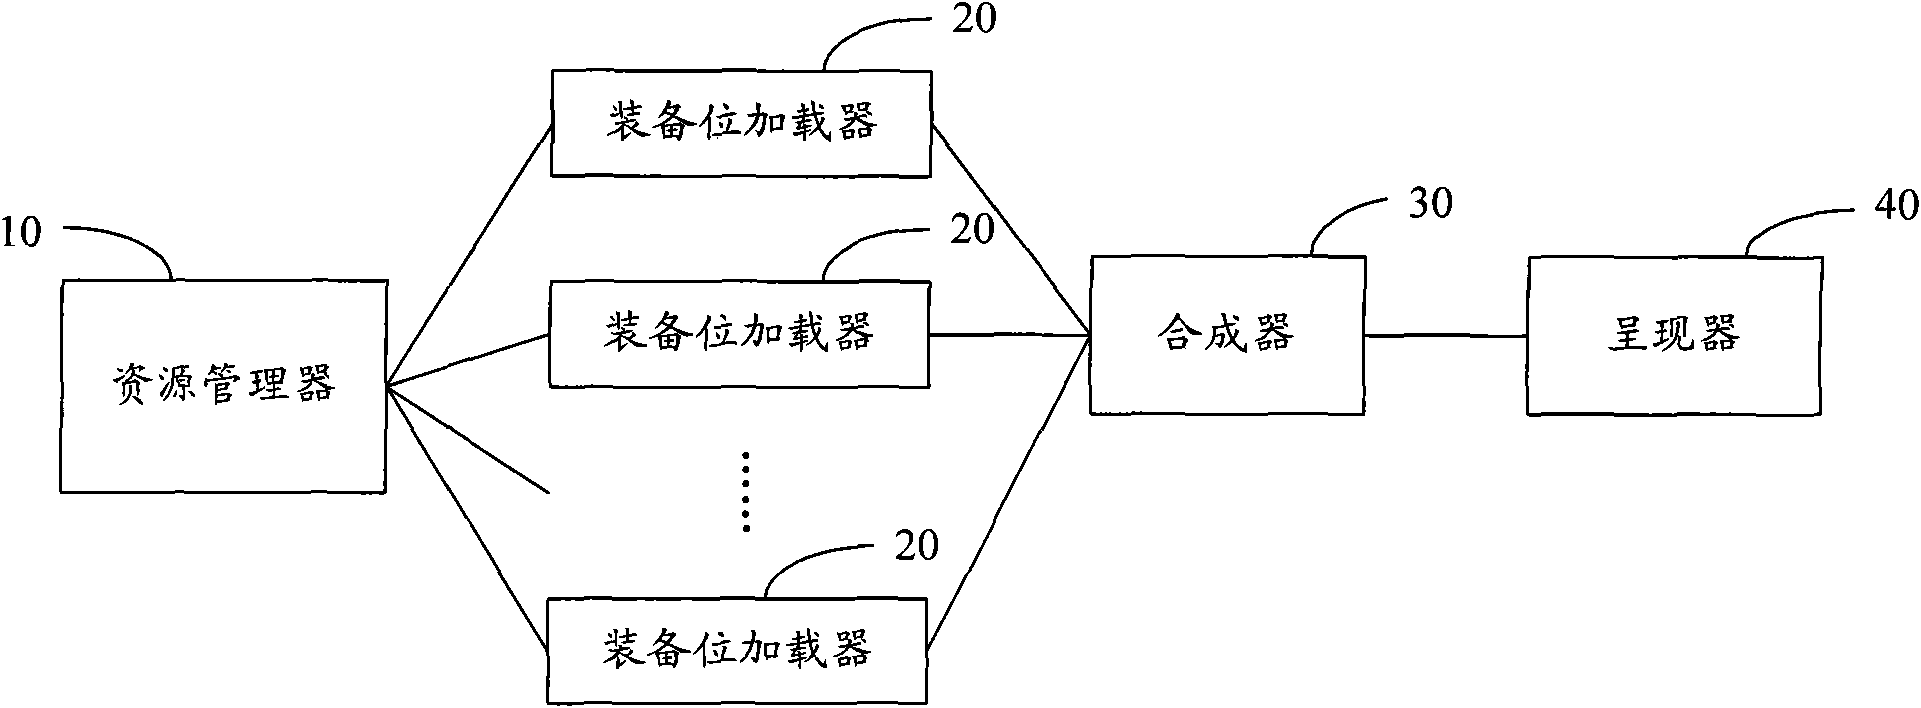 Network virtual-role synthetic system and method